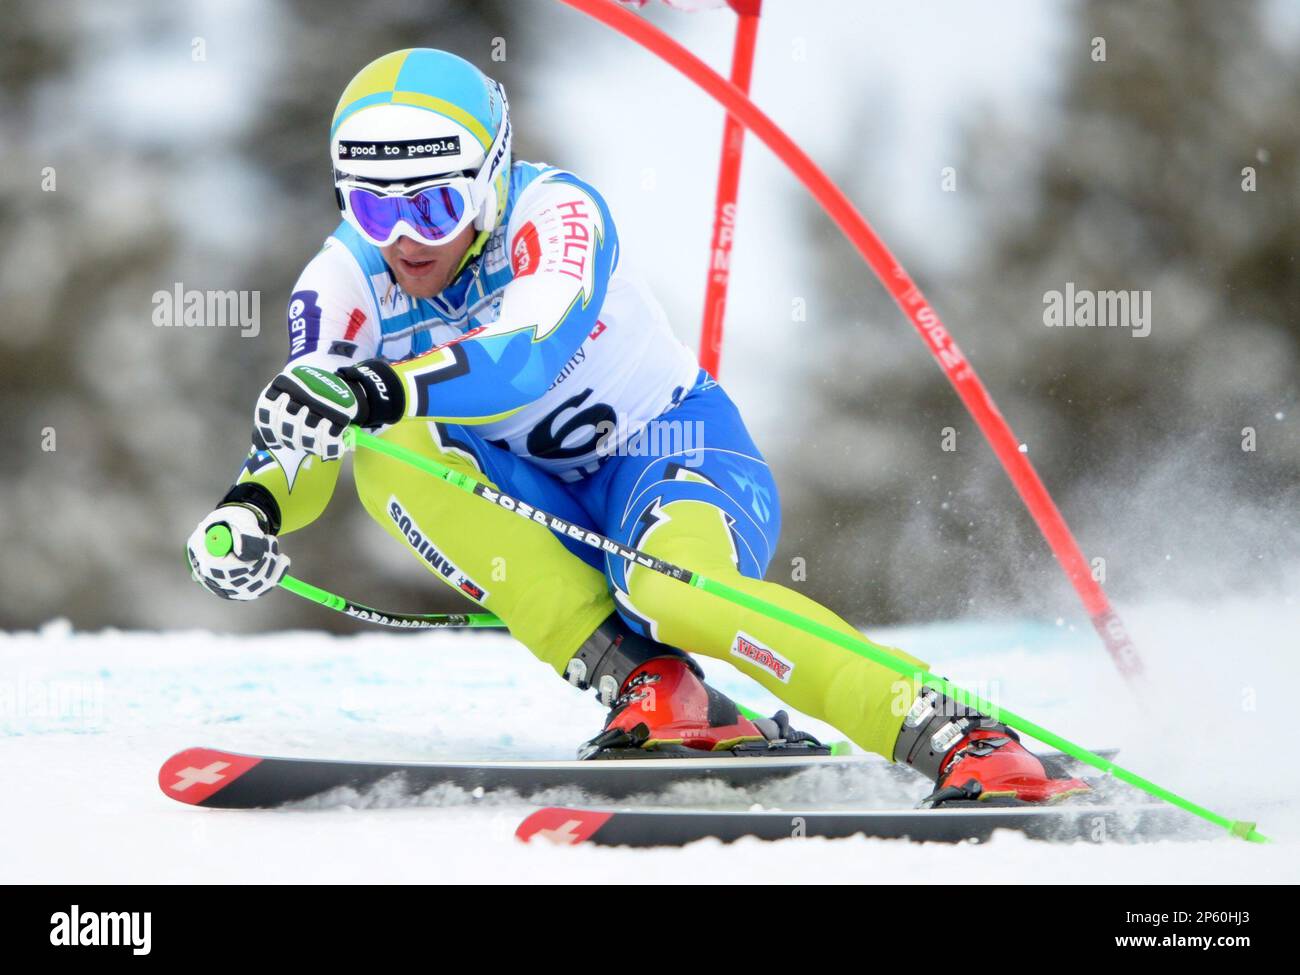 Rok Perko of Slovenia, races down the hill during the first training run at the men's World Cup downhill ski race in Lake Louise, Alberta, Wednesday, Nov. 21, 2012. (AP Photo/The Canadian Press, Jonathan Hayward) Stock Photo